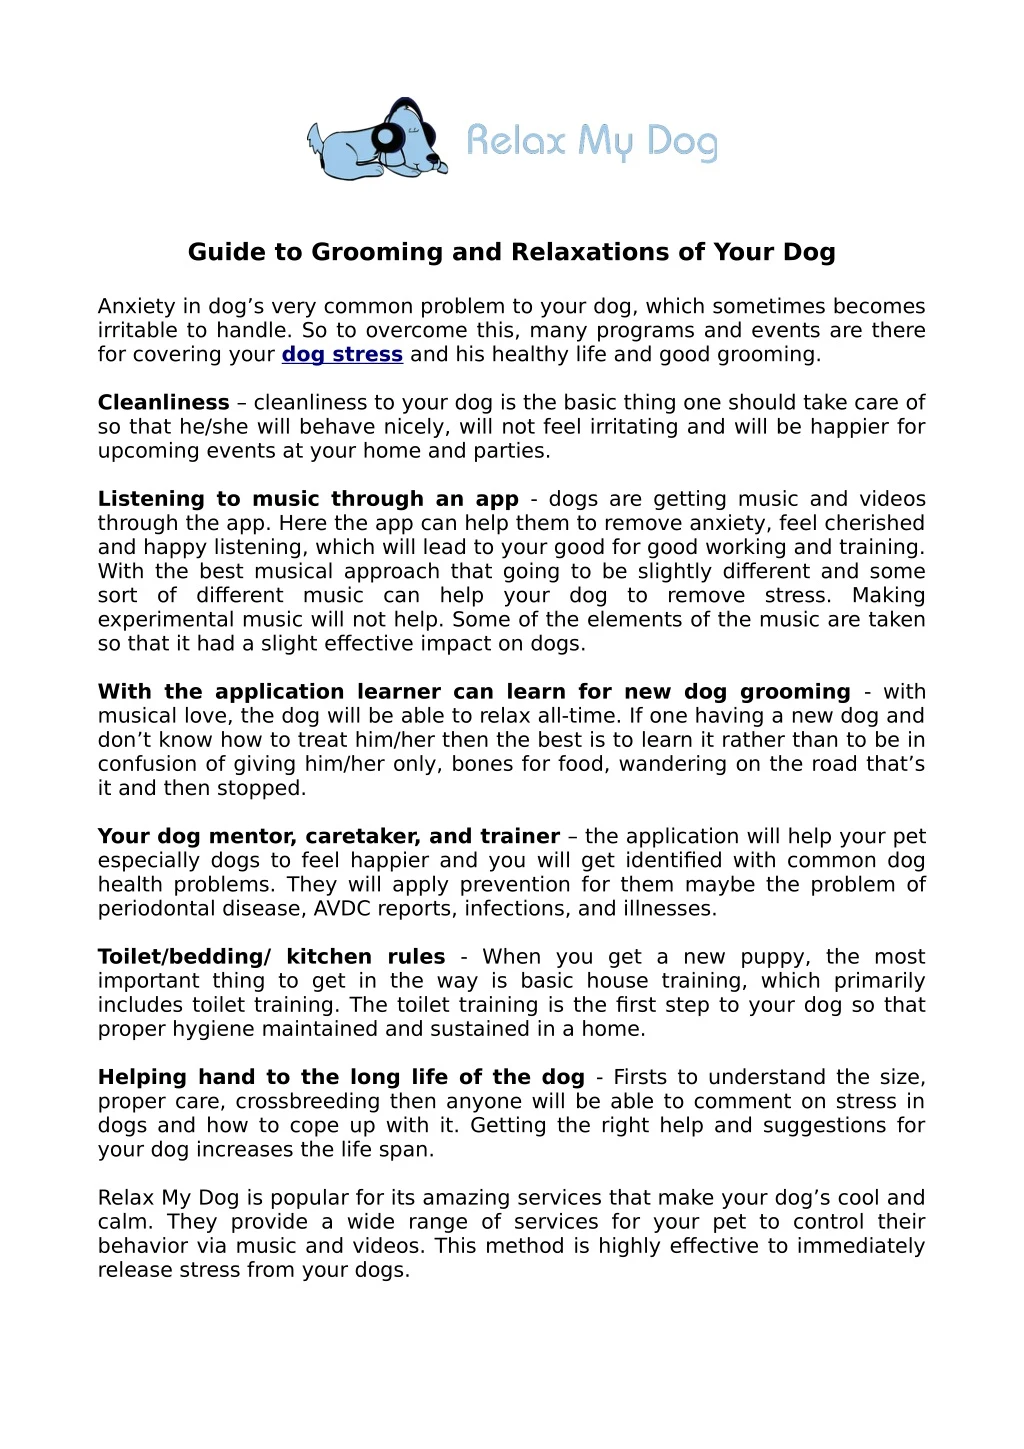 guide to grooming and relaxations of your dog